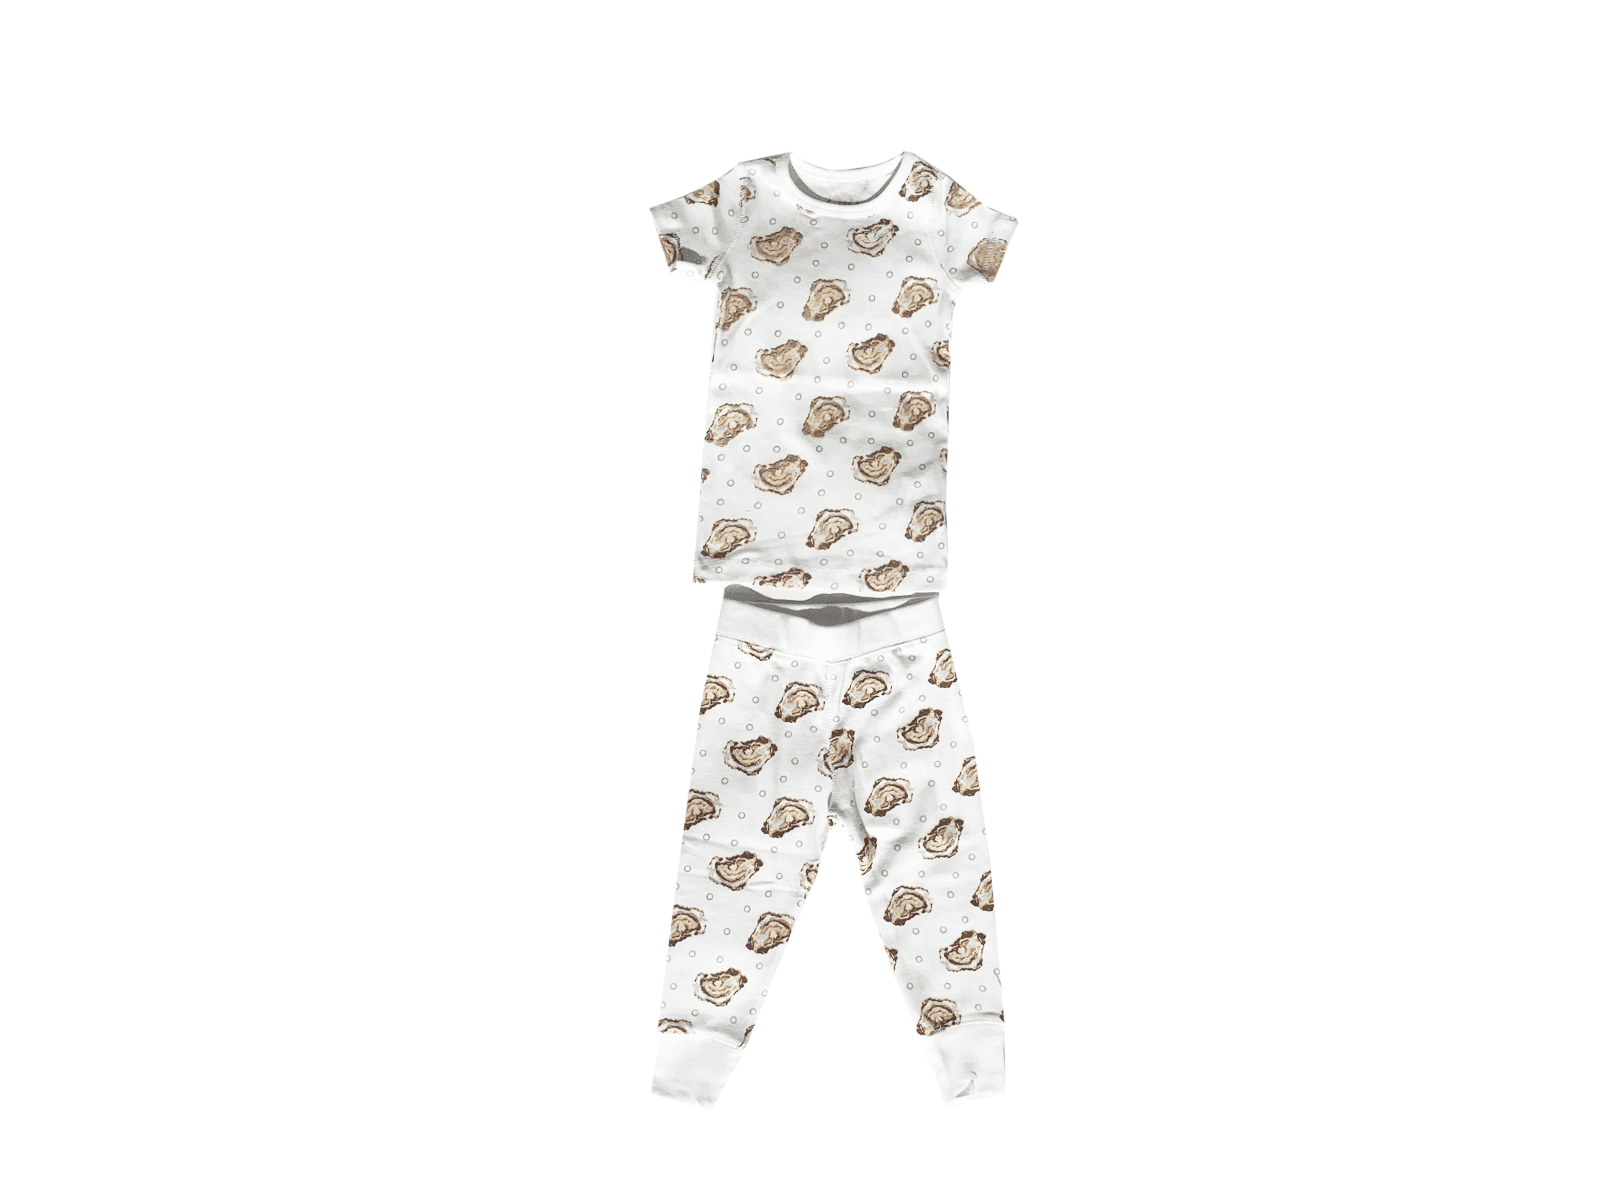 Toddler wearing "Aw Shucks" oyster-themed pajamas, smiling and holding a toy oyster, on a white background.